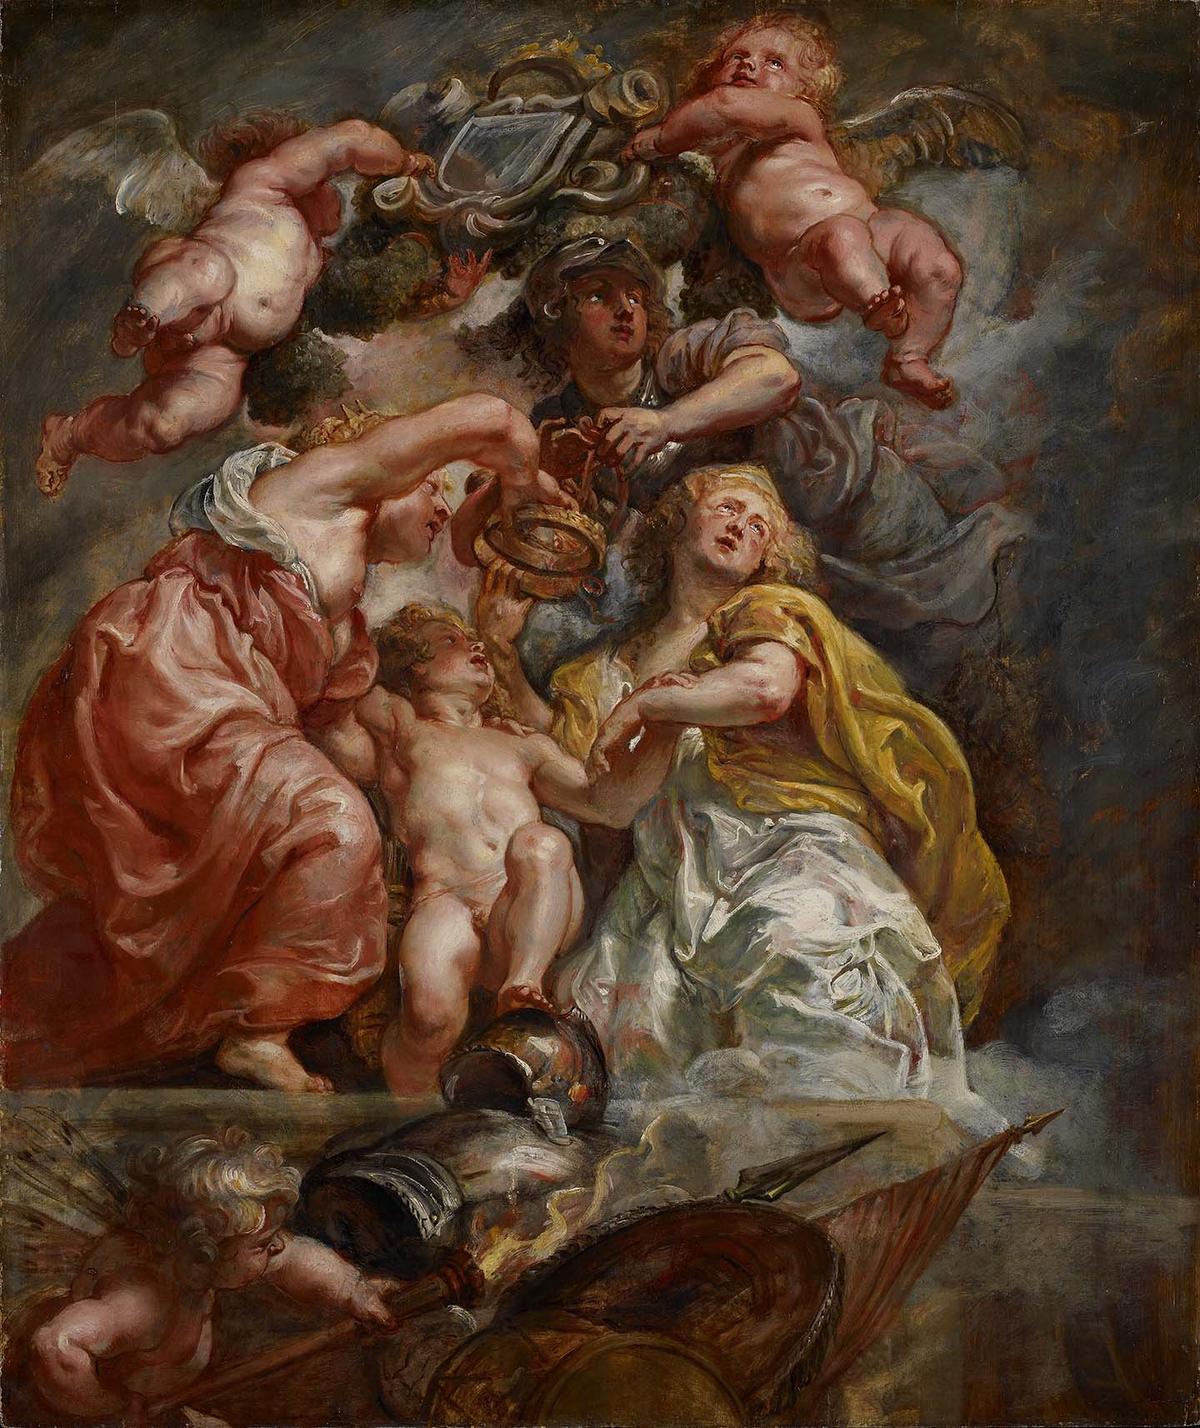 Oil sketch for the ceiling mural of "The Union of England and Scotland (Charles I as the Prince of Wales)," 1633–1634, by Peter Paul Rubens. Oil on panel; 33 1/4 inches by 25 7/8 inches. Minneapolis Institute of Art. (Public Domain)